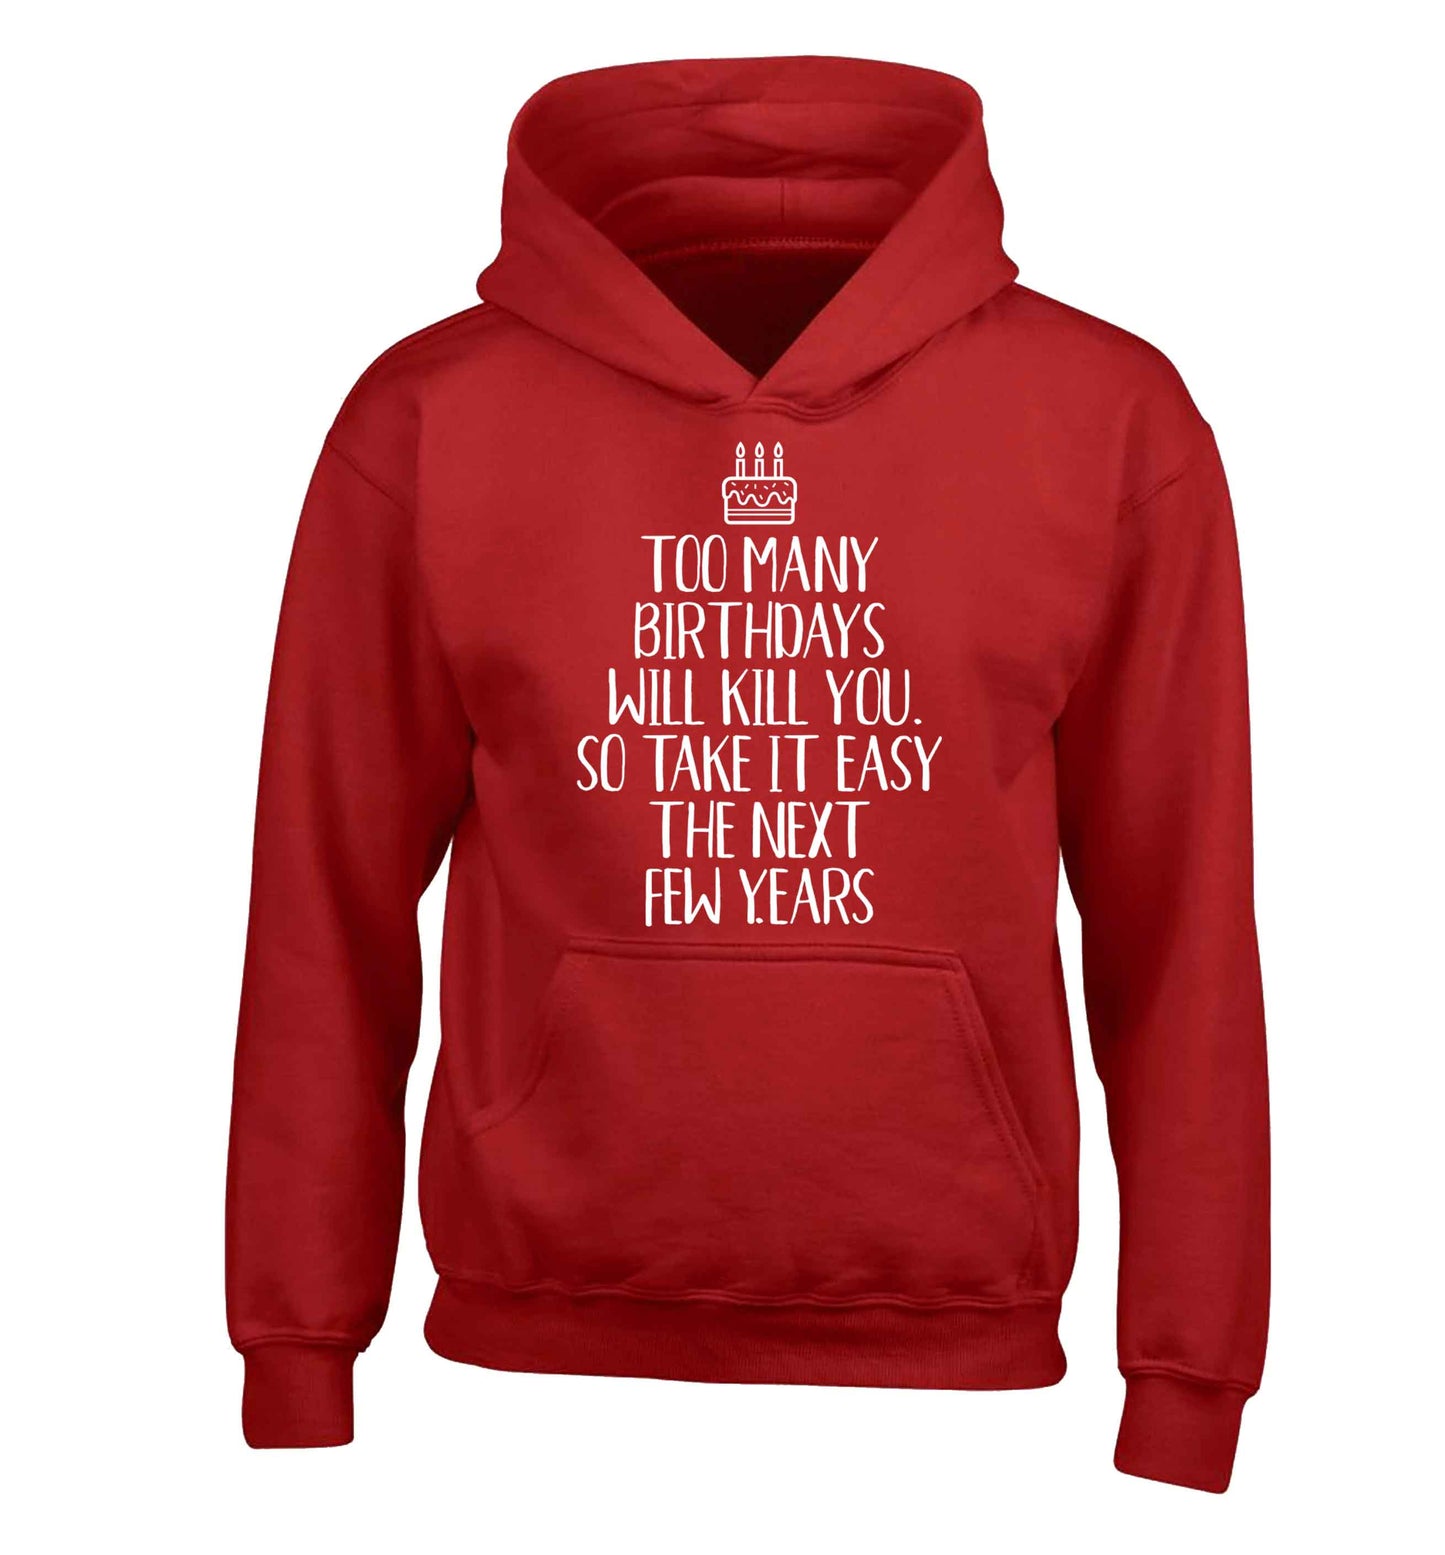 Too many birthdays will kill you so take it easy children's red hoodie 12-13 Years